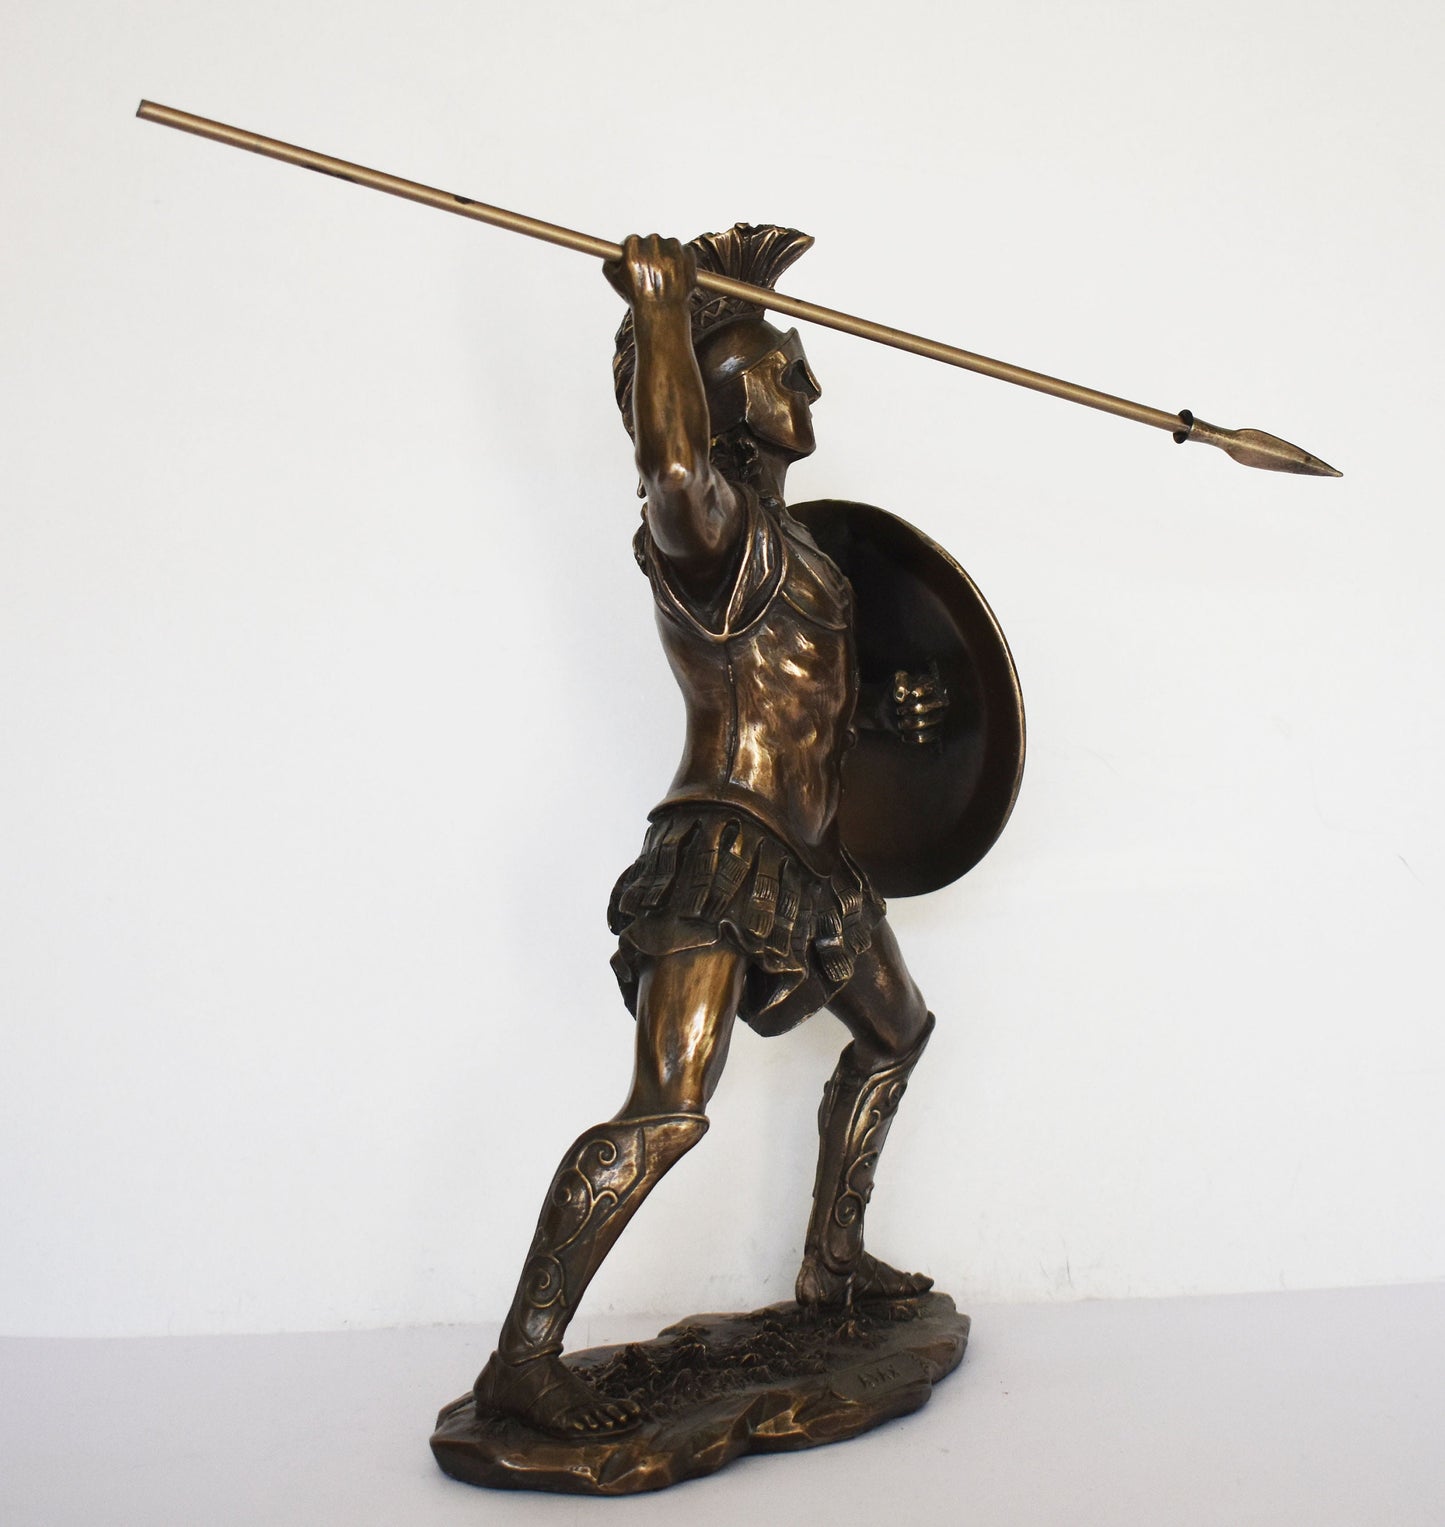 Ajax the Great - Son of Telamon, King of Salamis - Hero of Trojan War -  Warrior of Great Courage - Cold Cast Bronze Resin